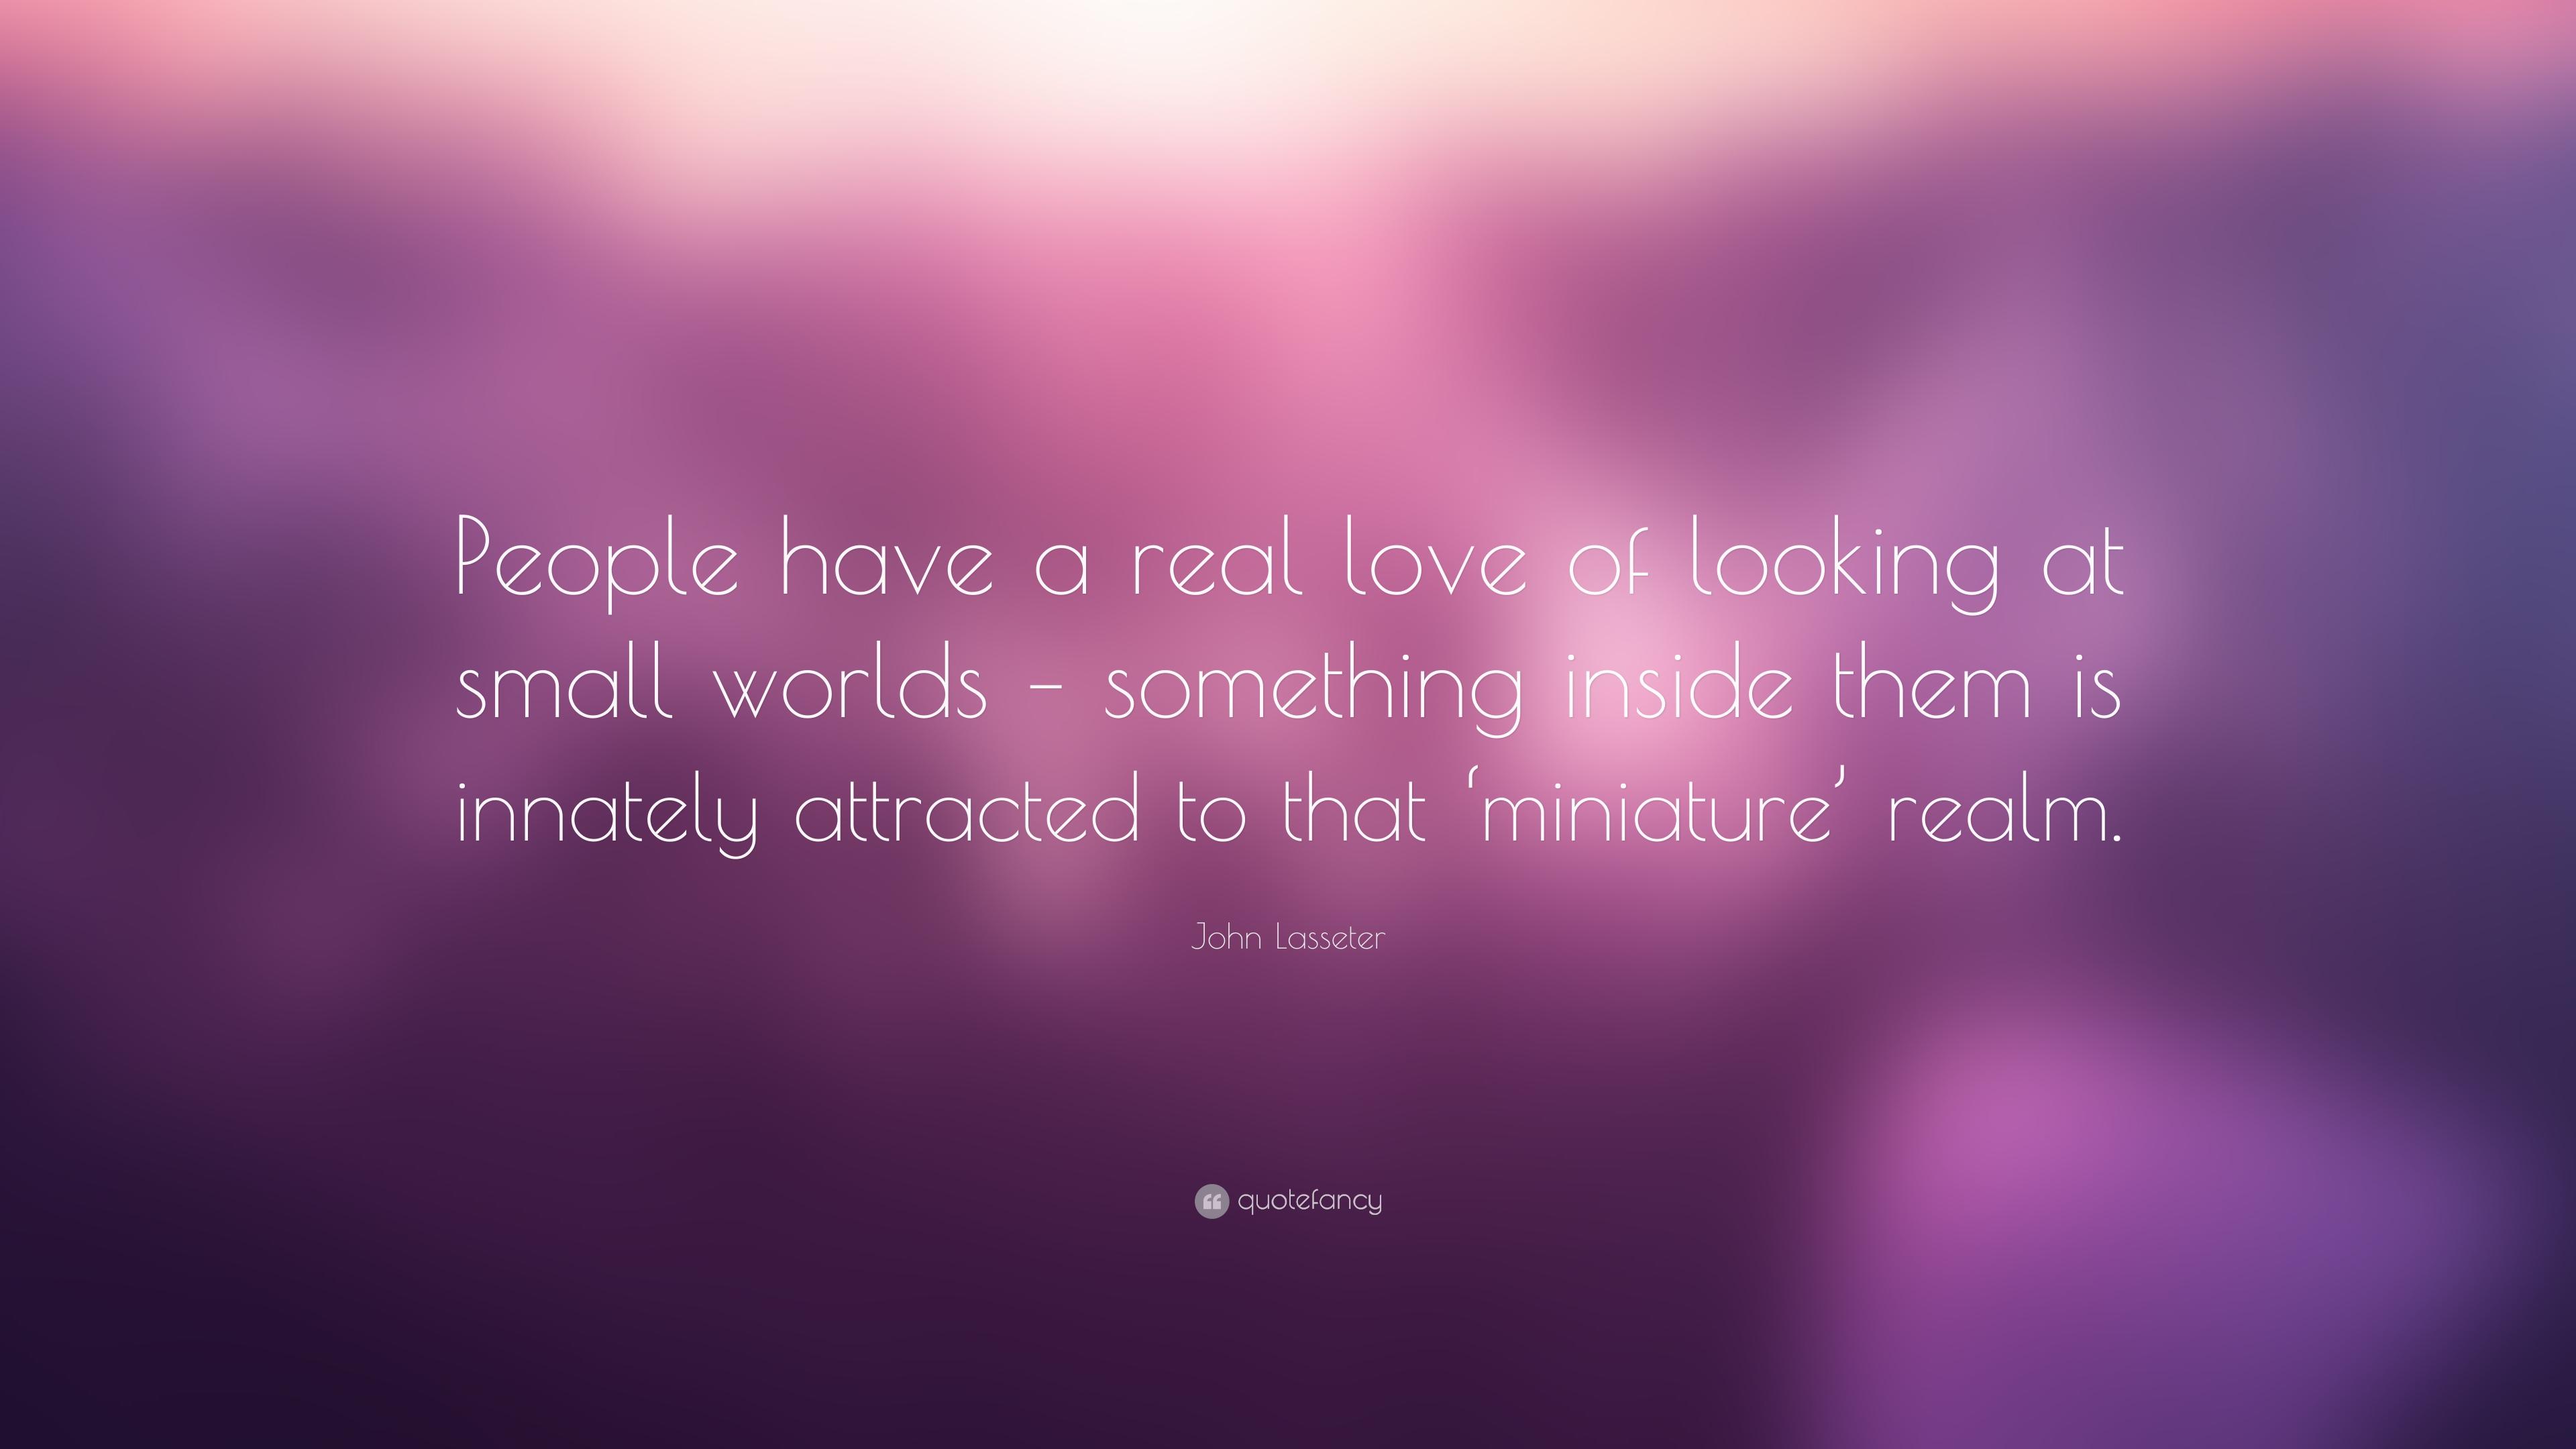 John Lasseter Quote: “People have a real love of looking at small